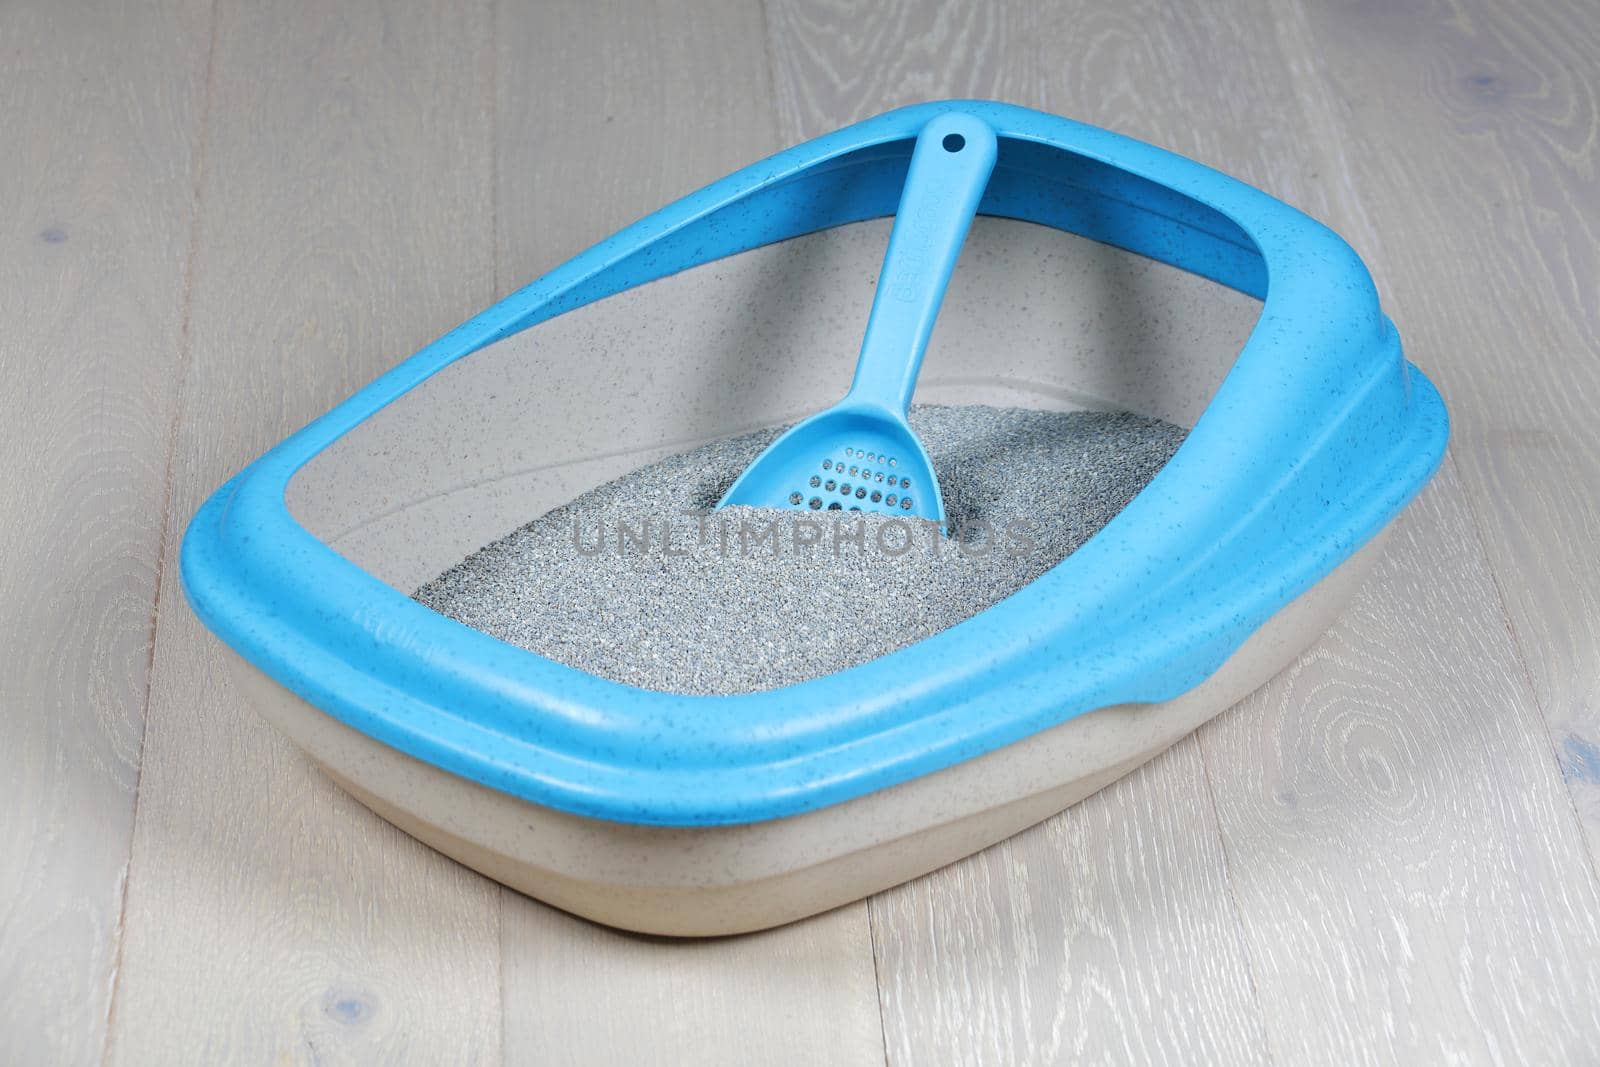 A cat litter tray and scoop on a wood floor